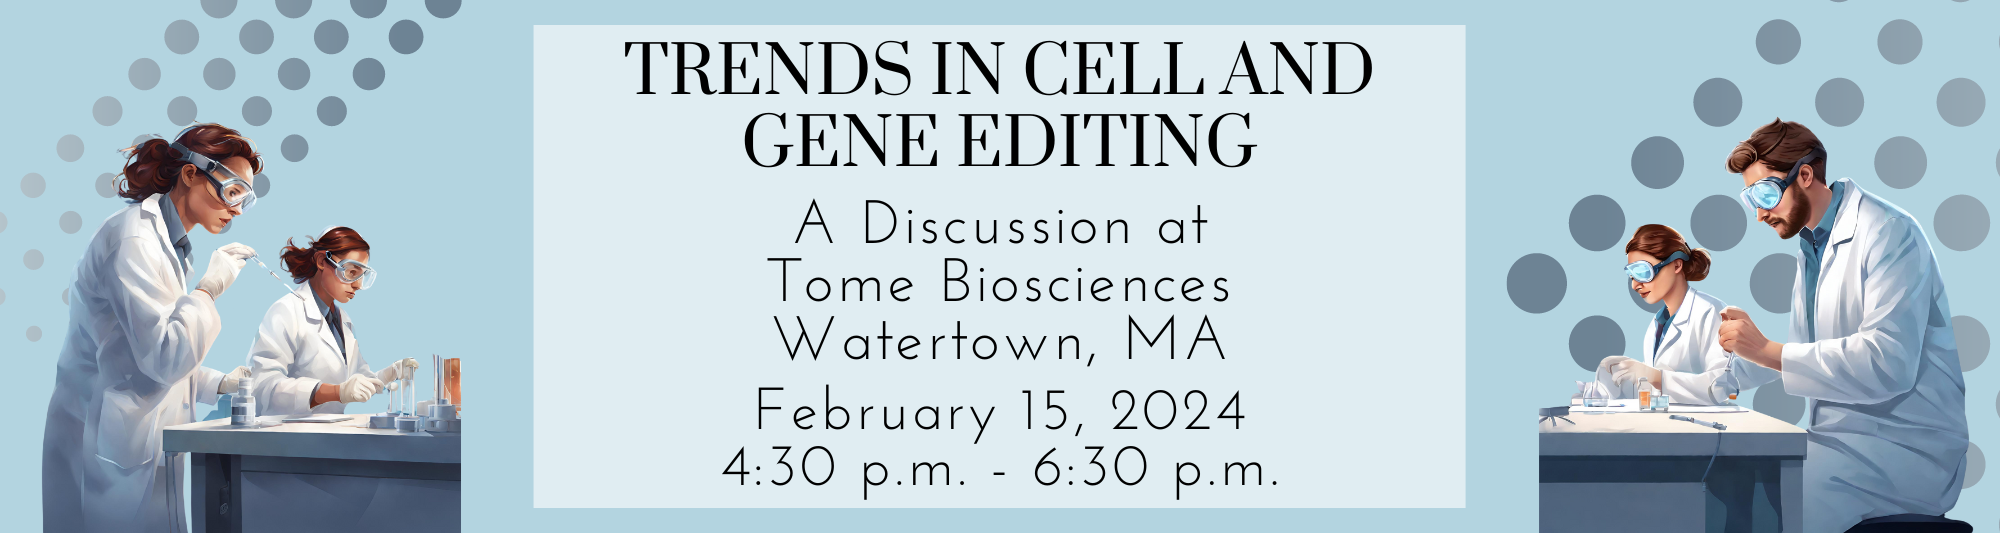 Trends in Cell and Gene Editing